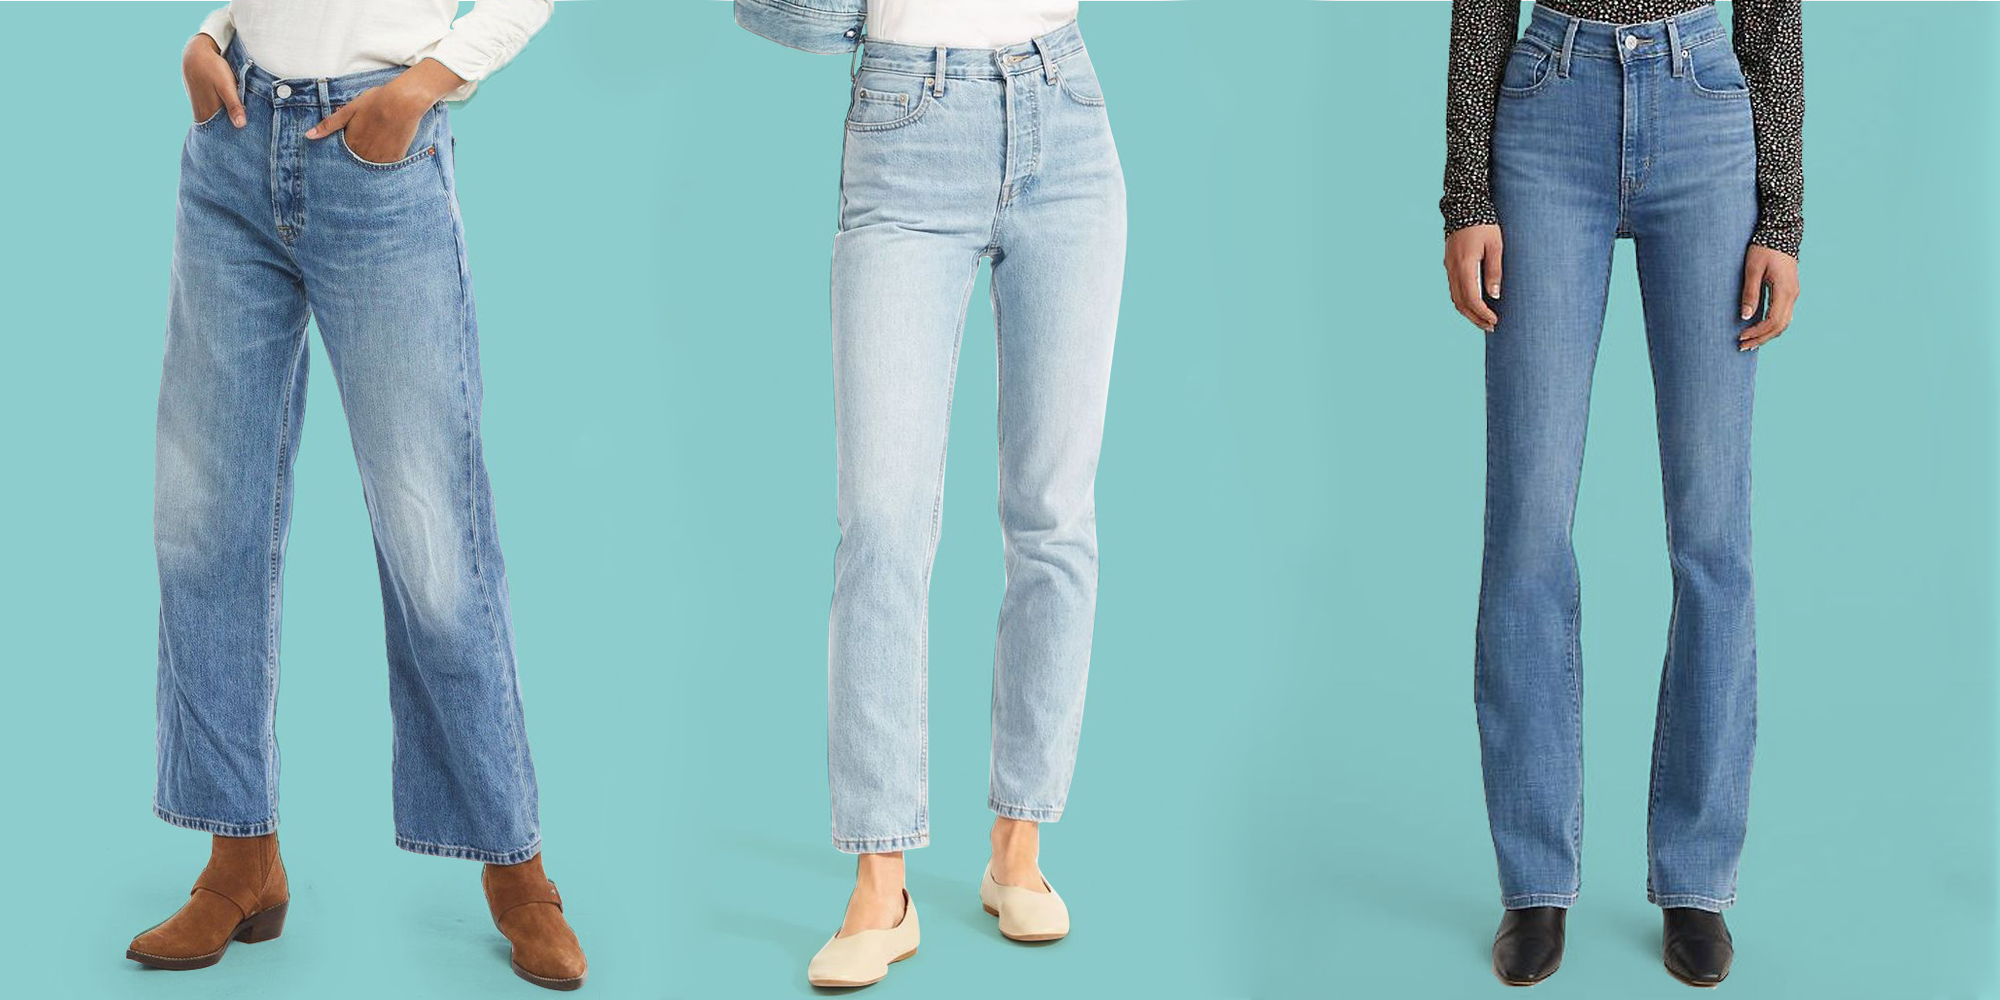 10 Best Eco-Friendly Denim Brands to Love | People Heart Planet | Discover  and Shop Fair Trade and Sustainable Brands - People Heart Planet